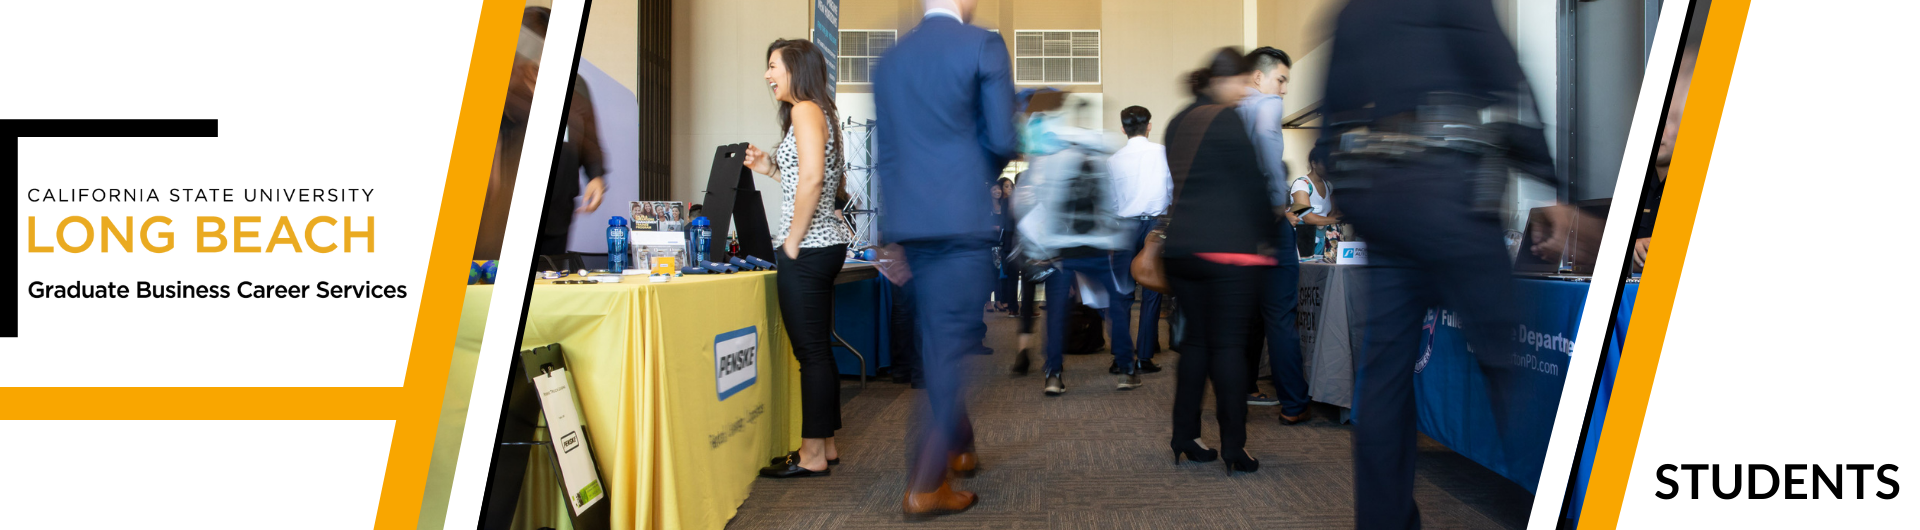 CSULB Graduate Business Career Services - Jobs and Internships